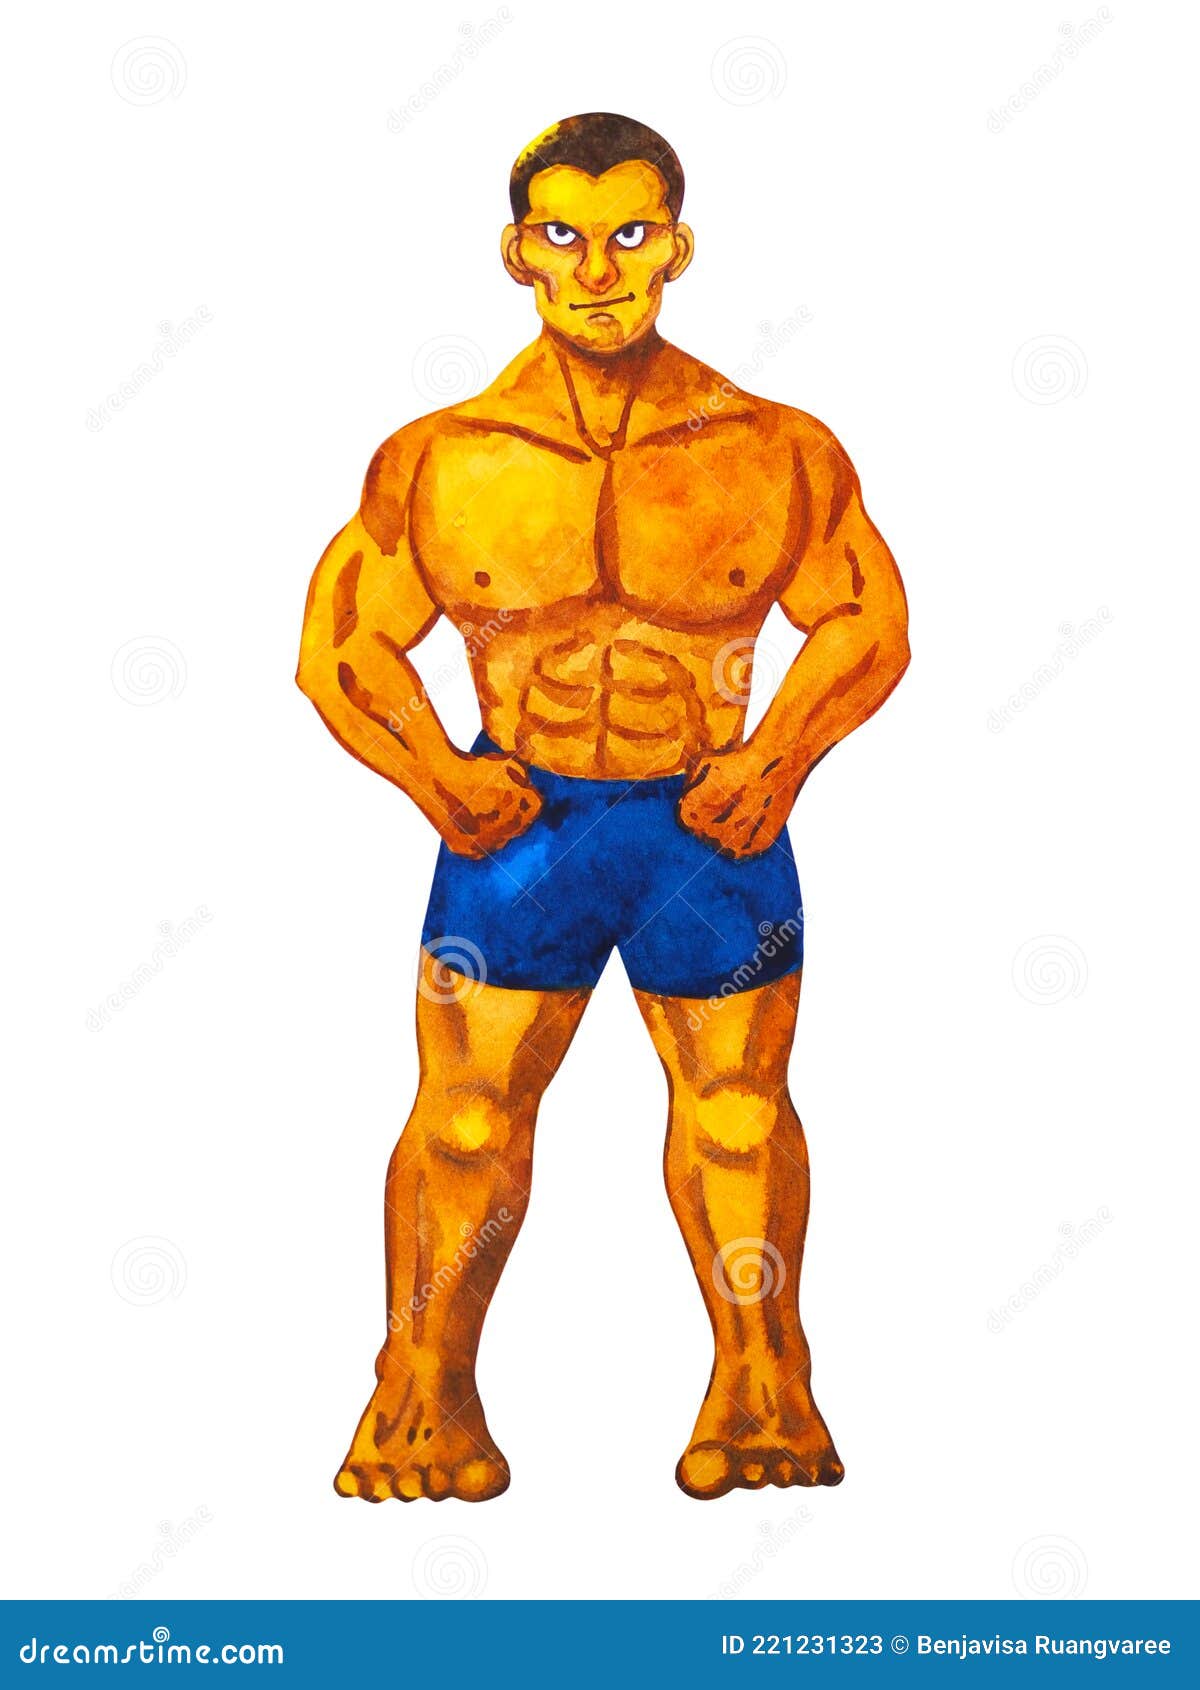 Boxer Strong Man Sport Fighter Gym Training Fitness Athlete Art Cartoon  Character Logo Symbol Watercolor Painting Illustration Stock Illustration -  Illustration of competition, active: 221231323